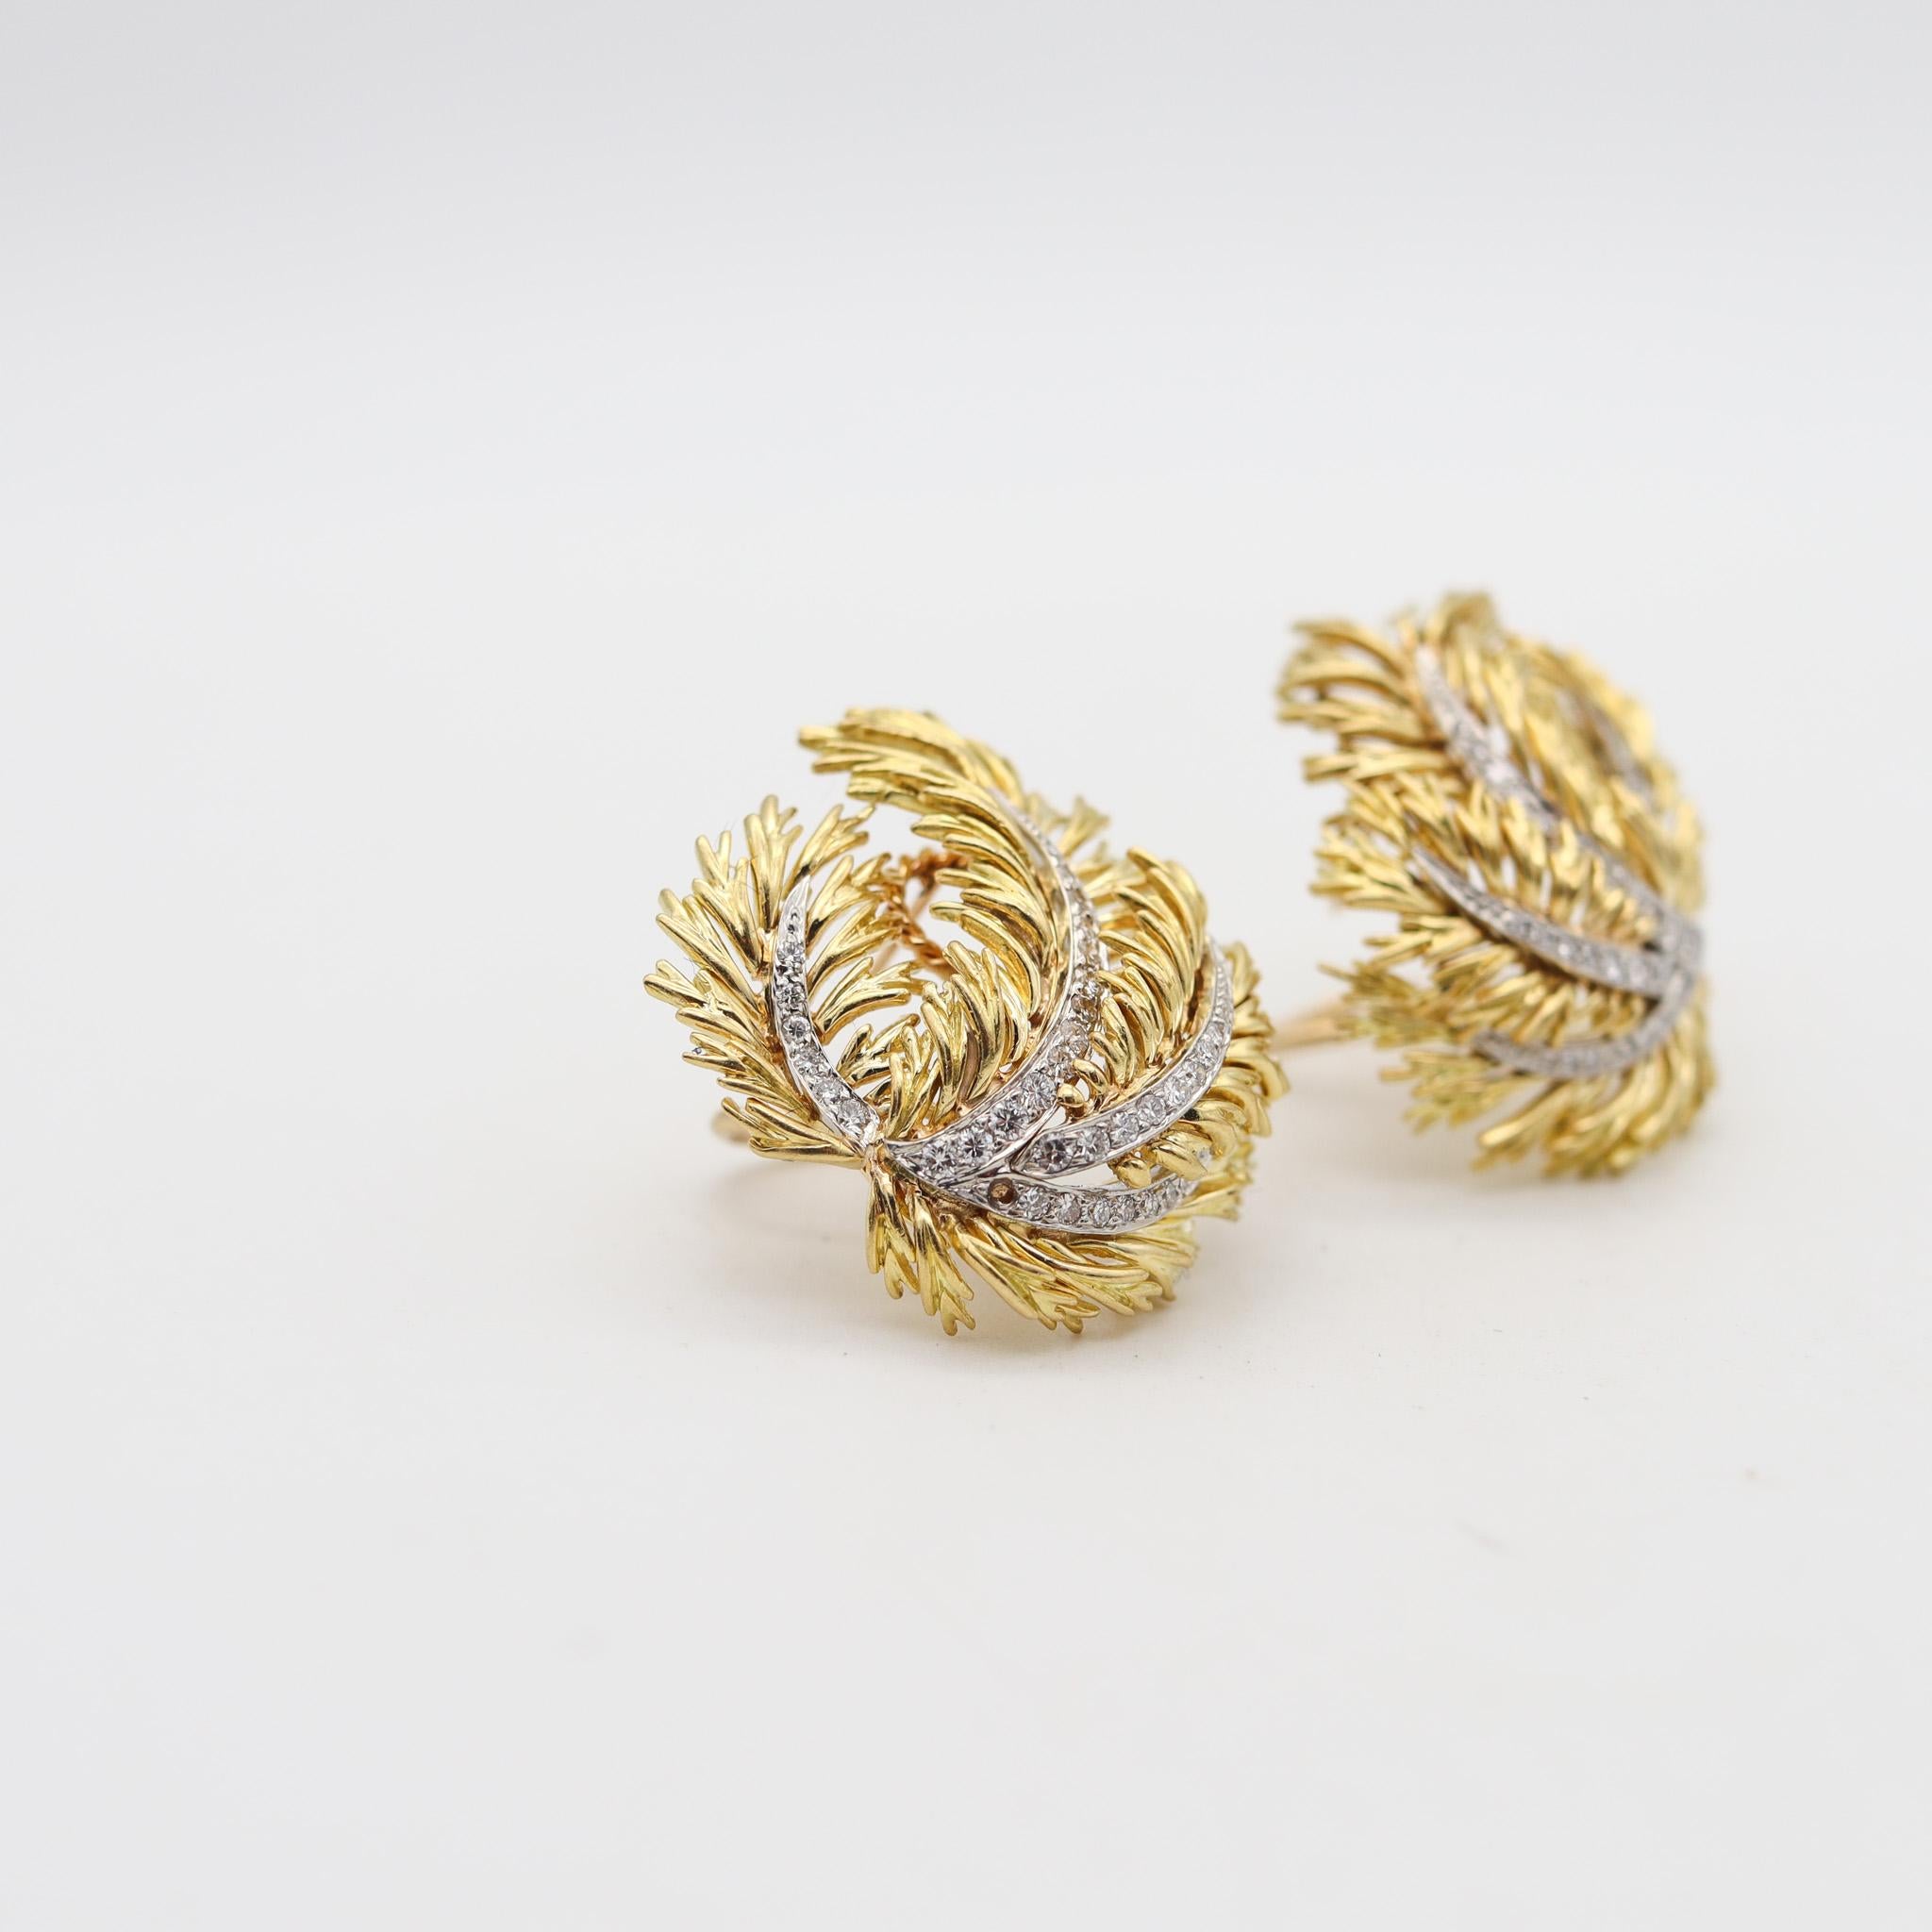 Modernist Cartier 1960 Clips Earrings In 18Kt Yellow Gold With 1.76 Ctw In VS Diamonds